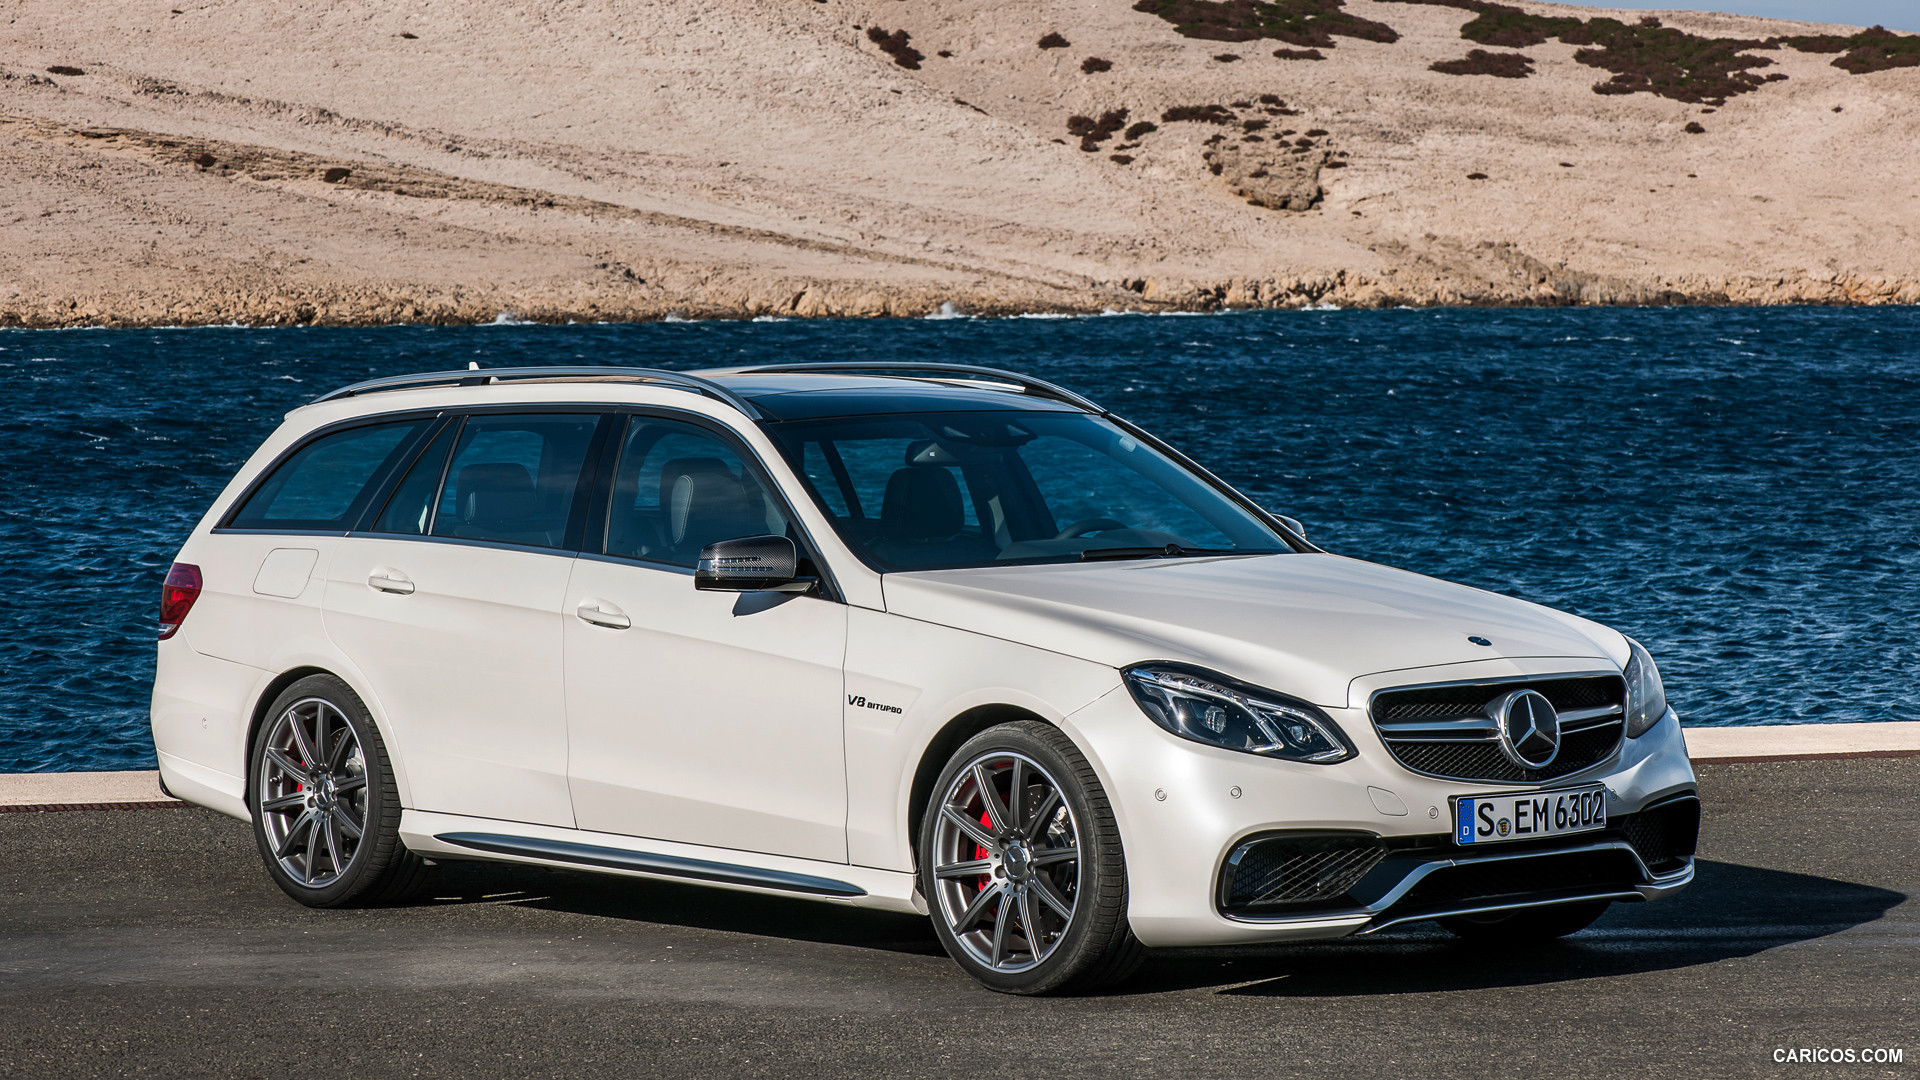 2014 Mercedes-Benz E 63 AMG S 4MATIC Estate  - Front, #10 of 18